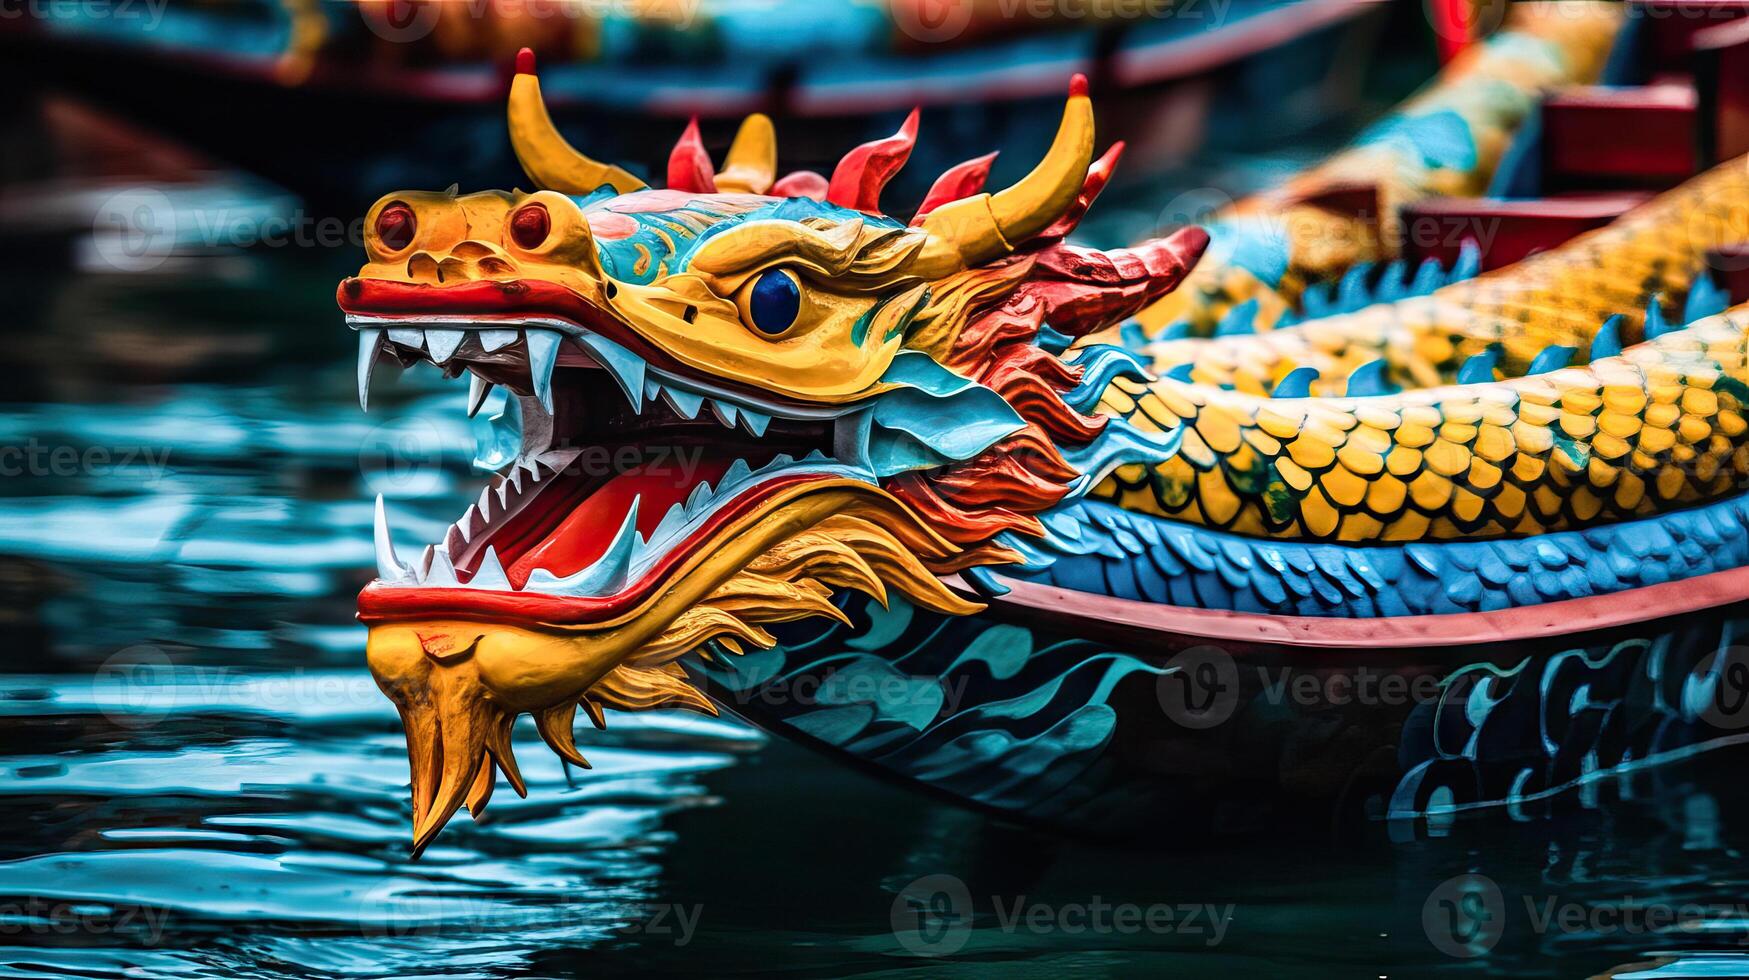 Enchanting Dragon Boat Pageantry in China - photo